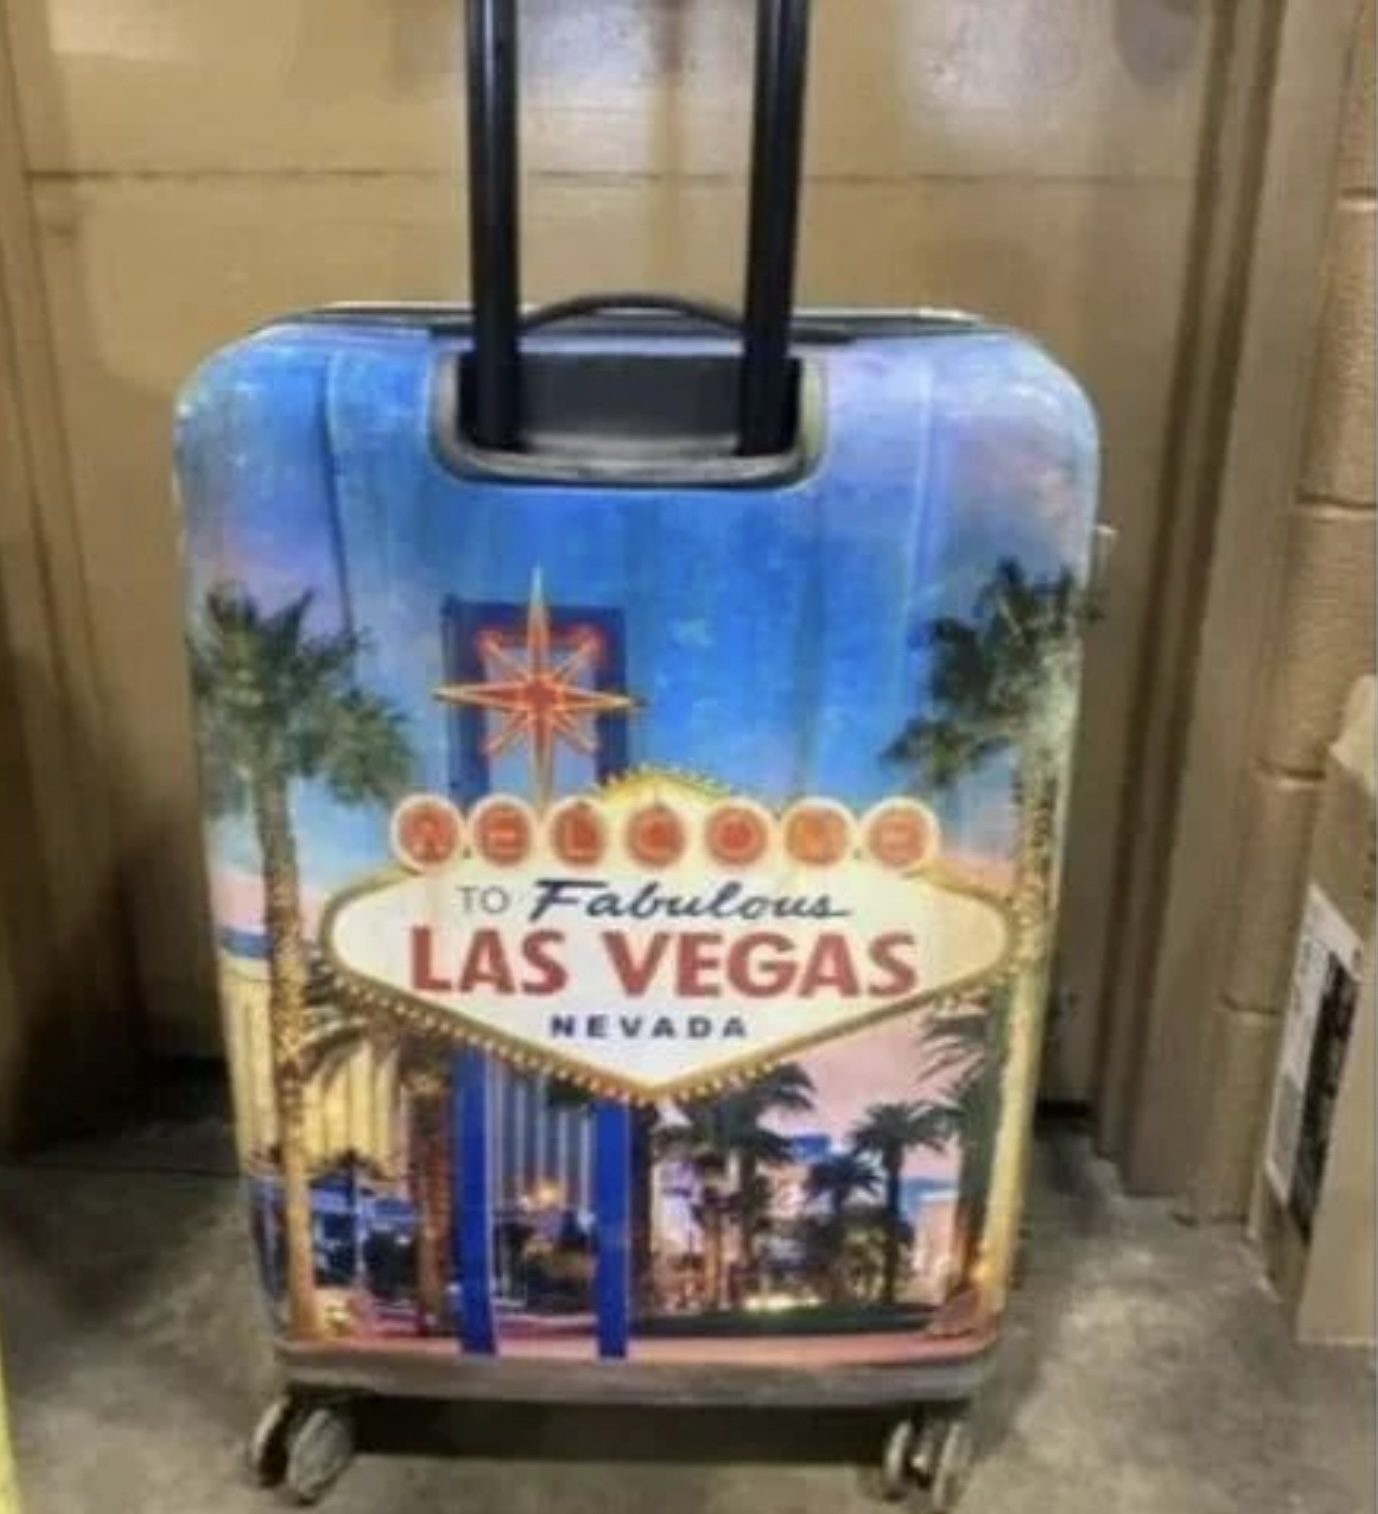 The suitcase Cairo Jordan was found in.